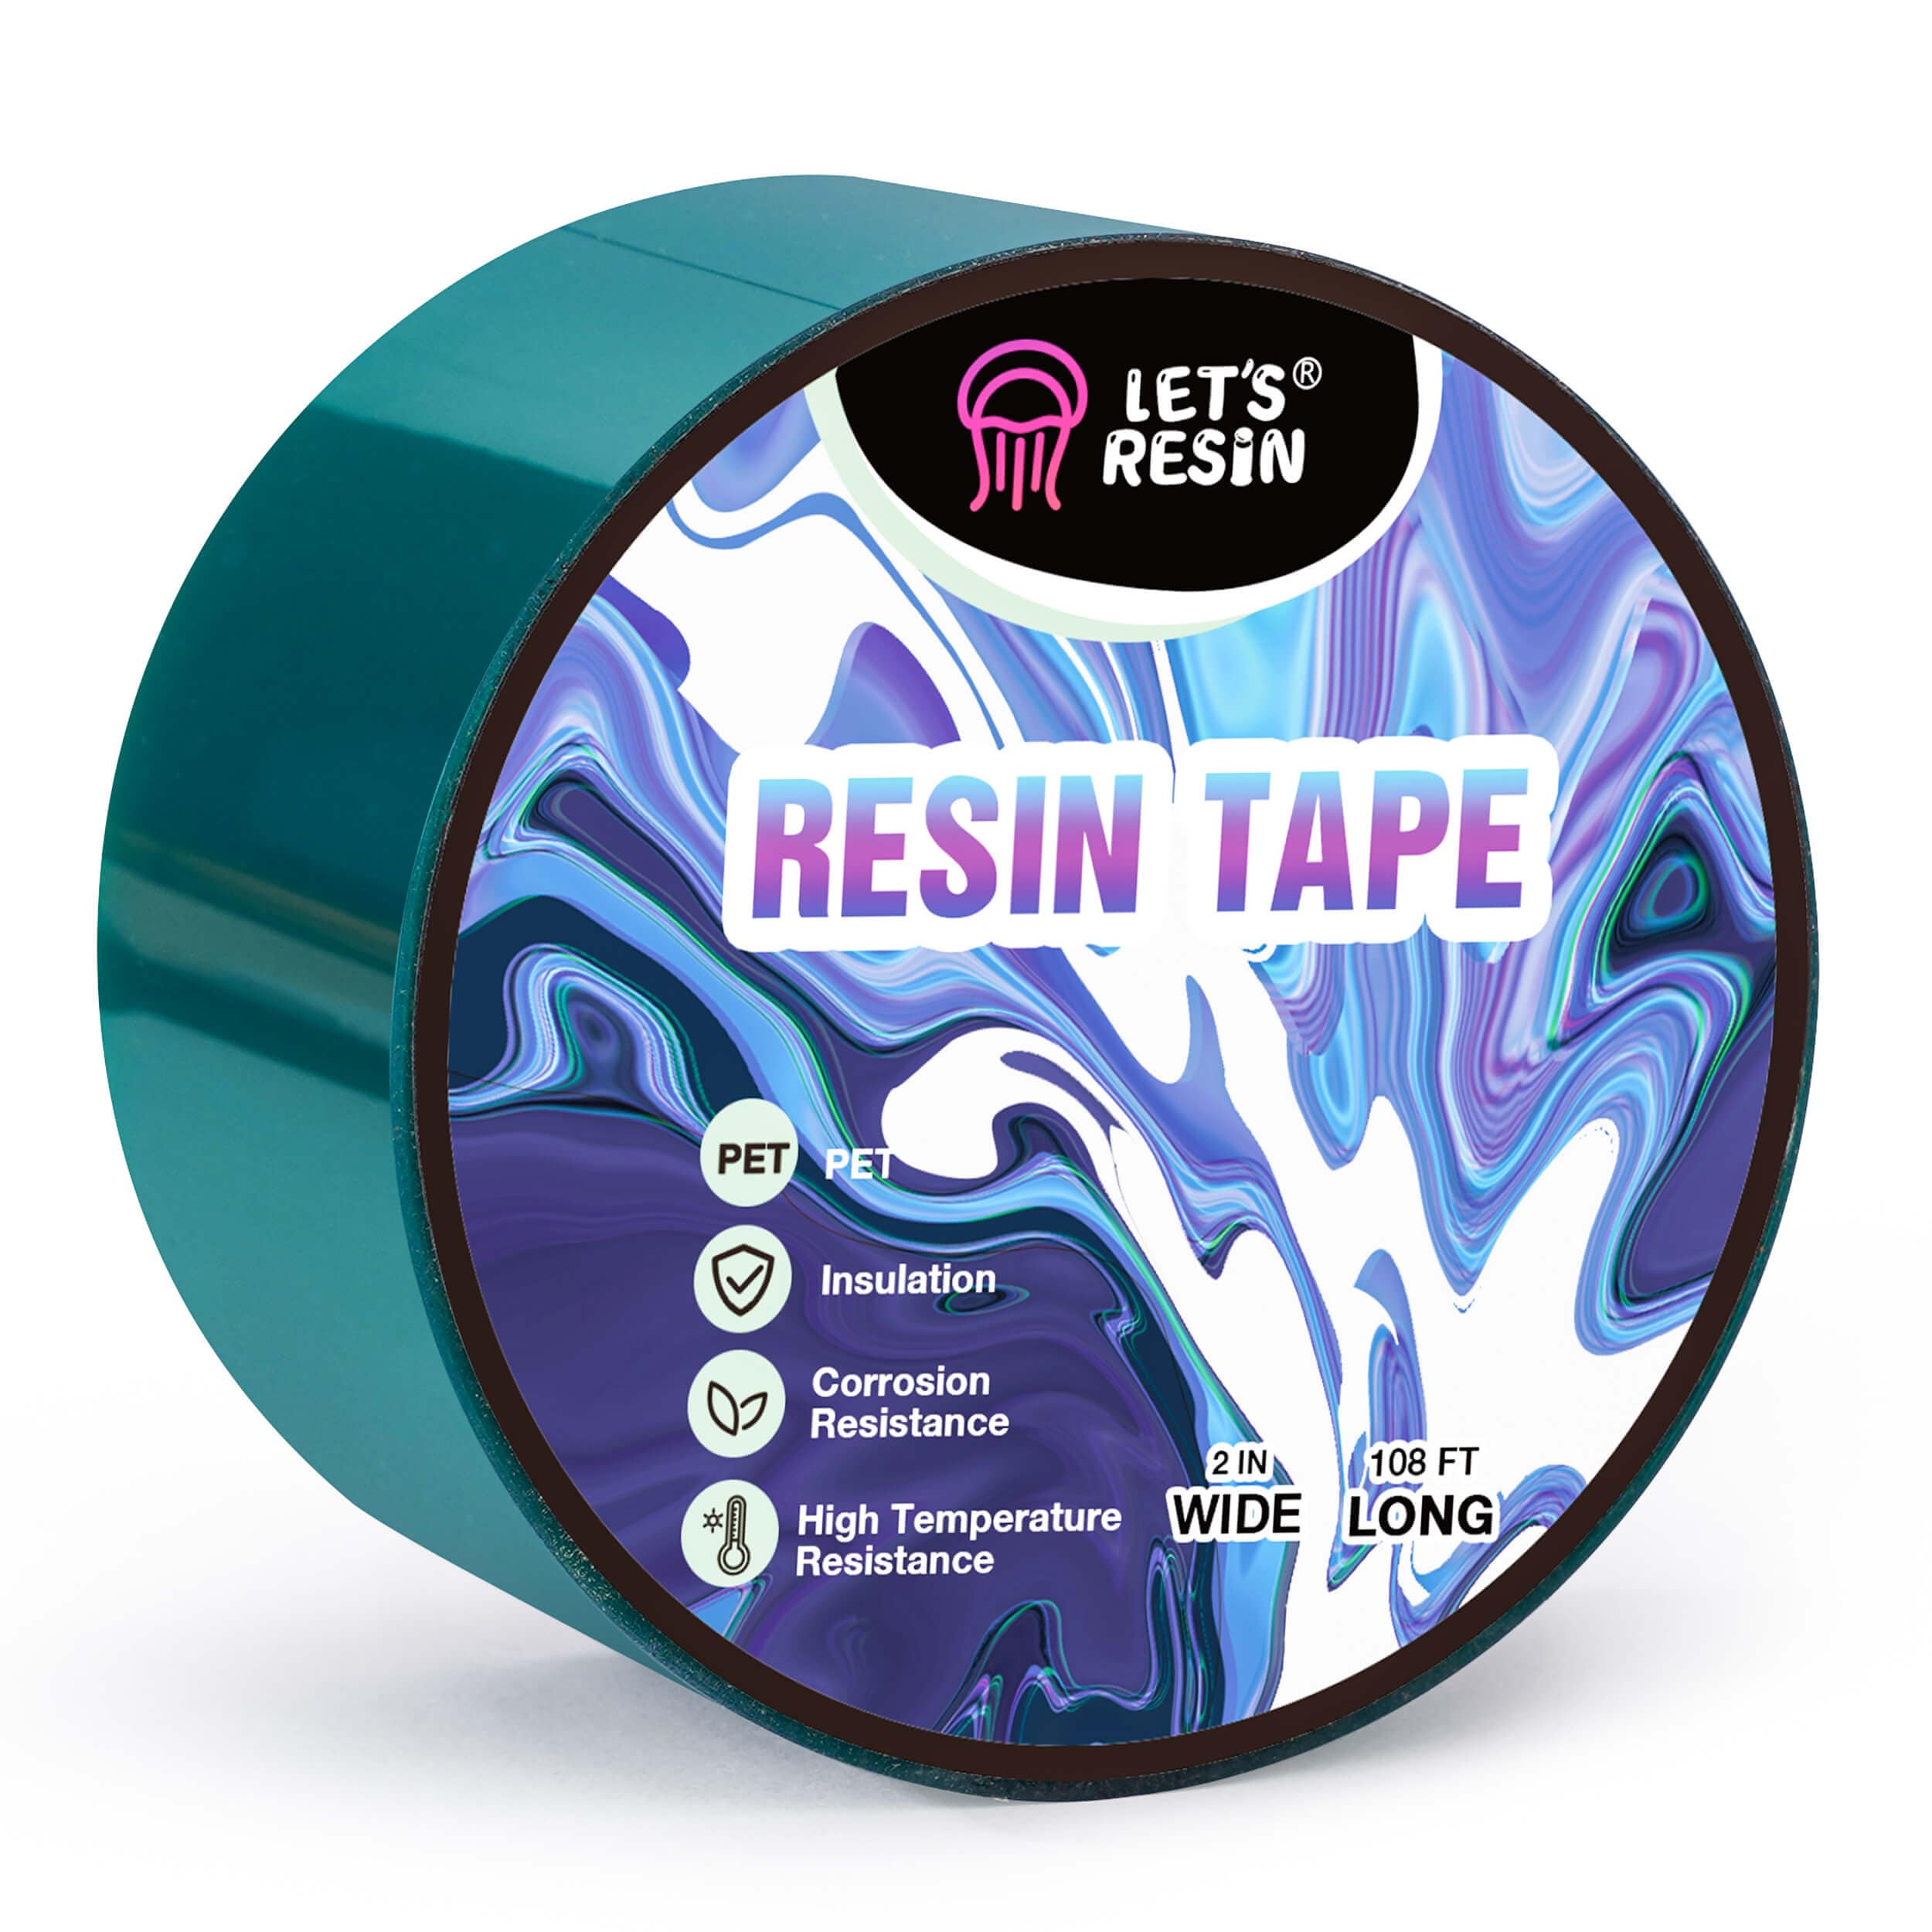 Epoxy Tape Silicone Adhesive Tape - Pixiss Mold Release Epoxy Resin Tape -  Polyester Tape for Resin, Construction Tape, Resin Tape for Epoxy Resin